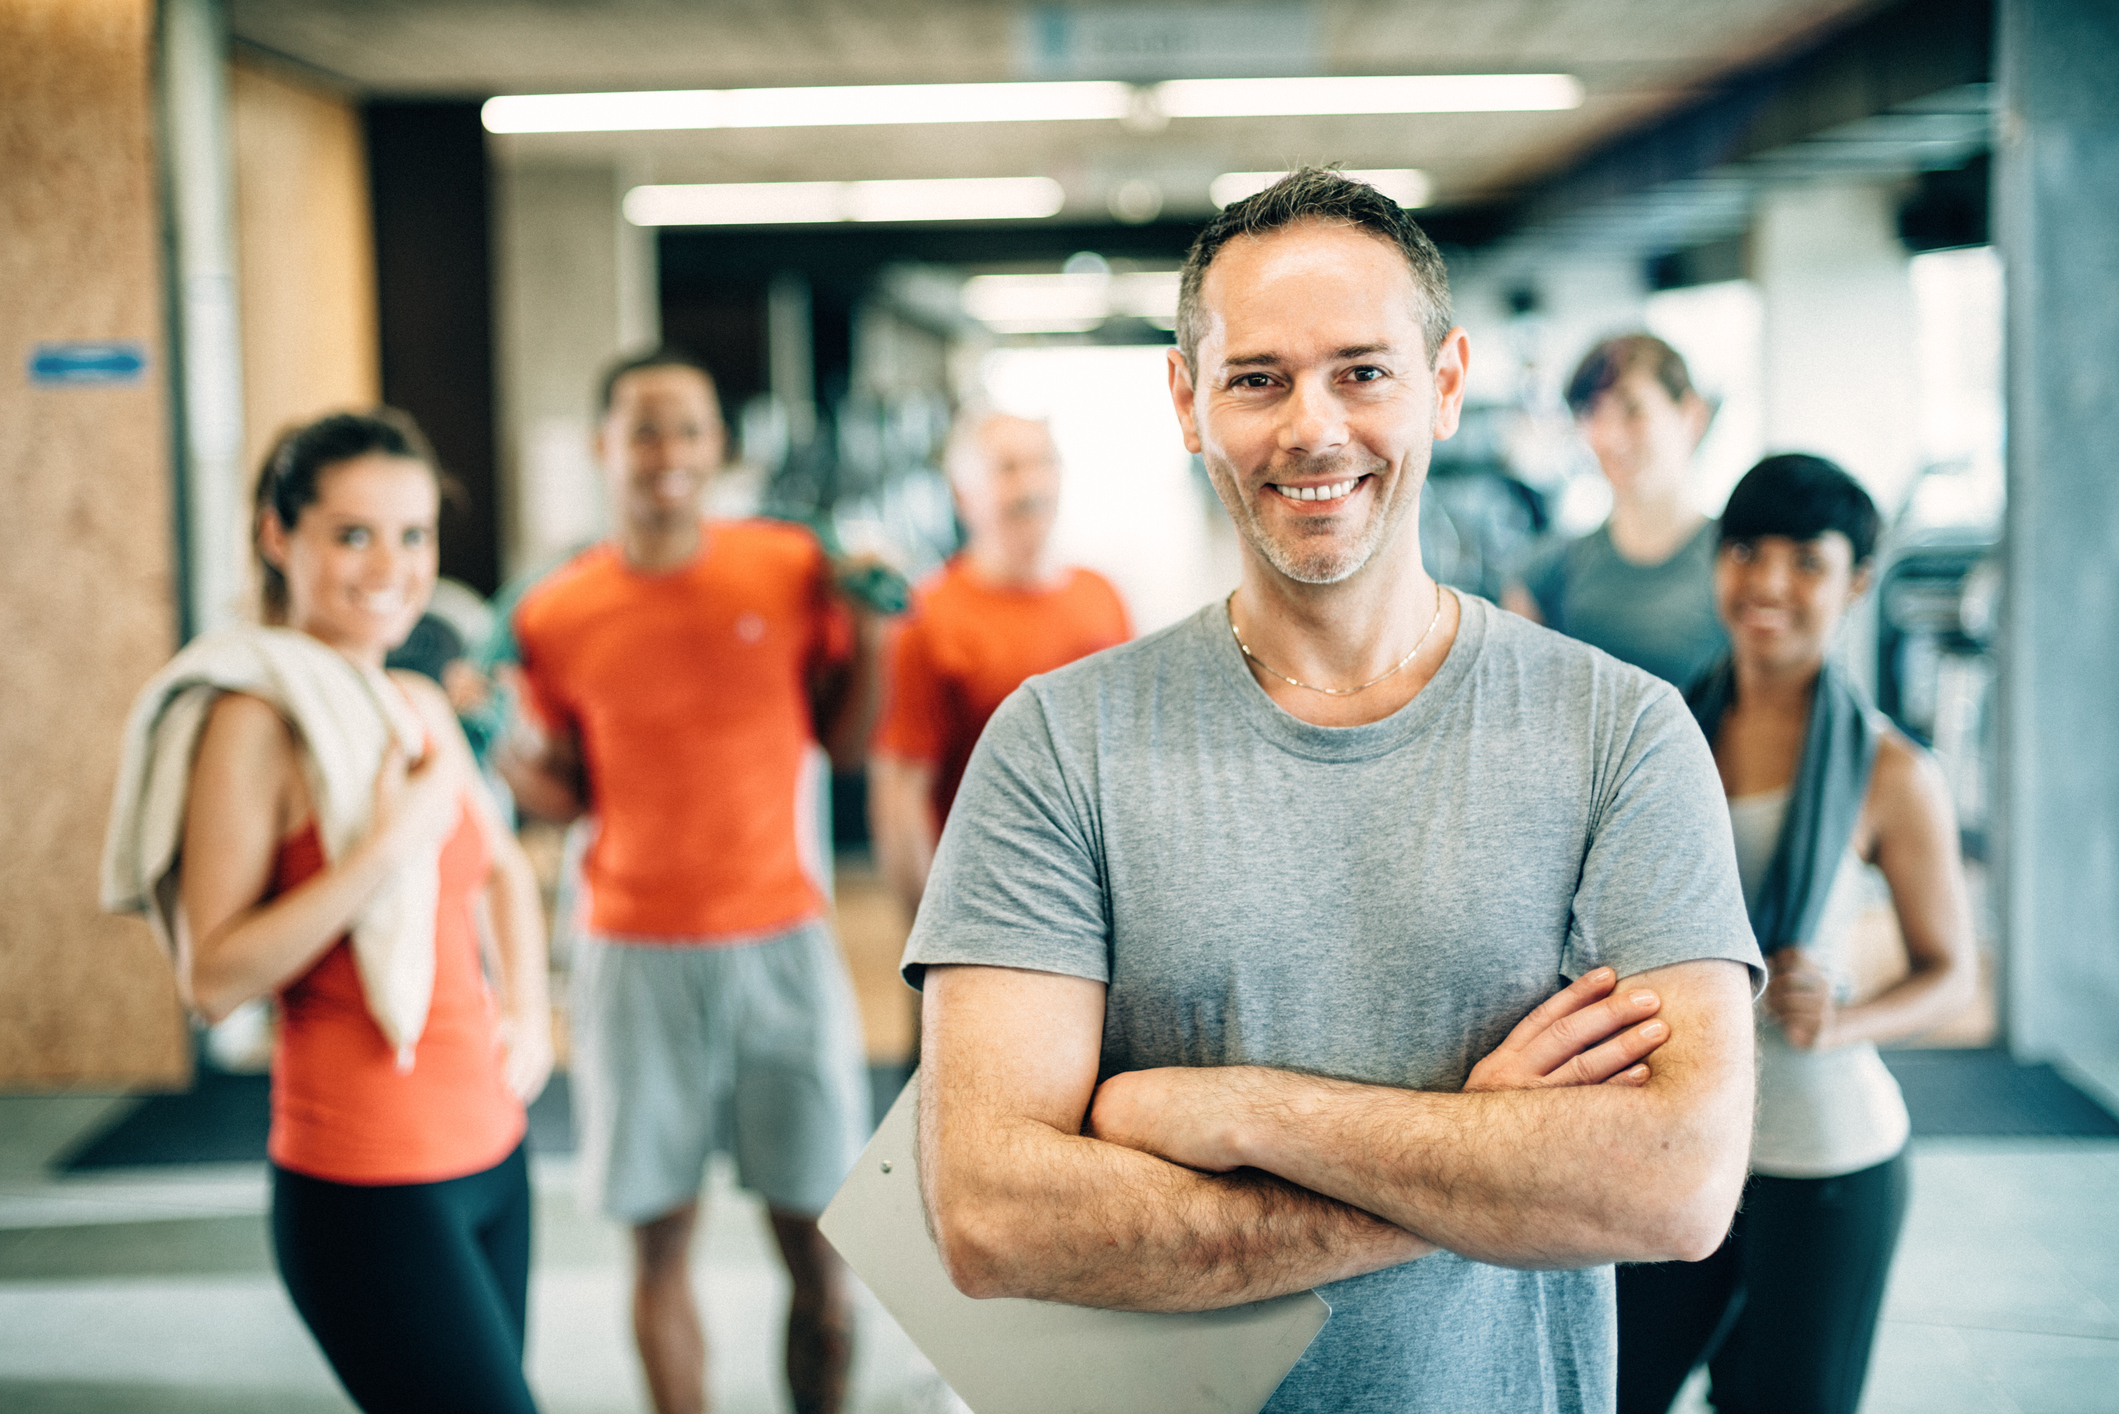 Healthy Diverse People in GYM